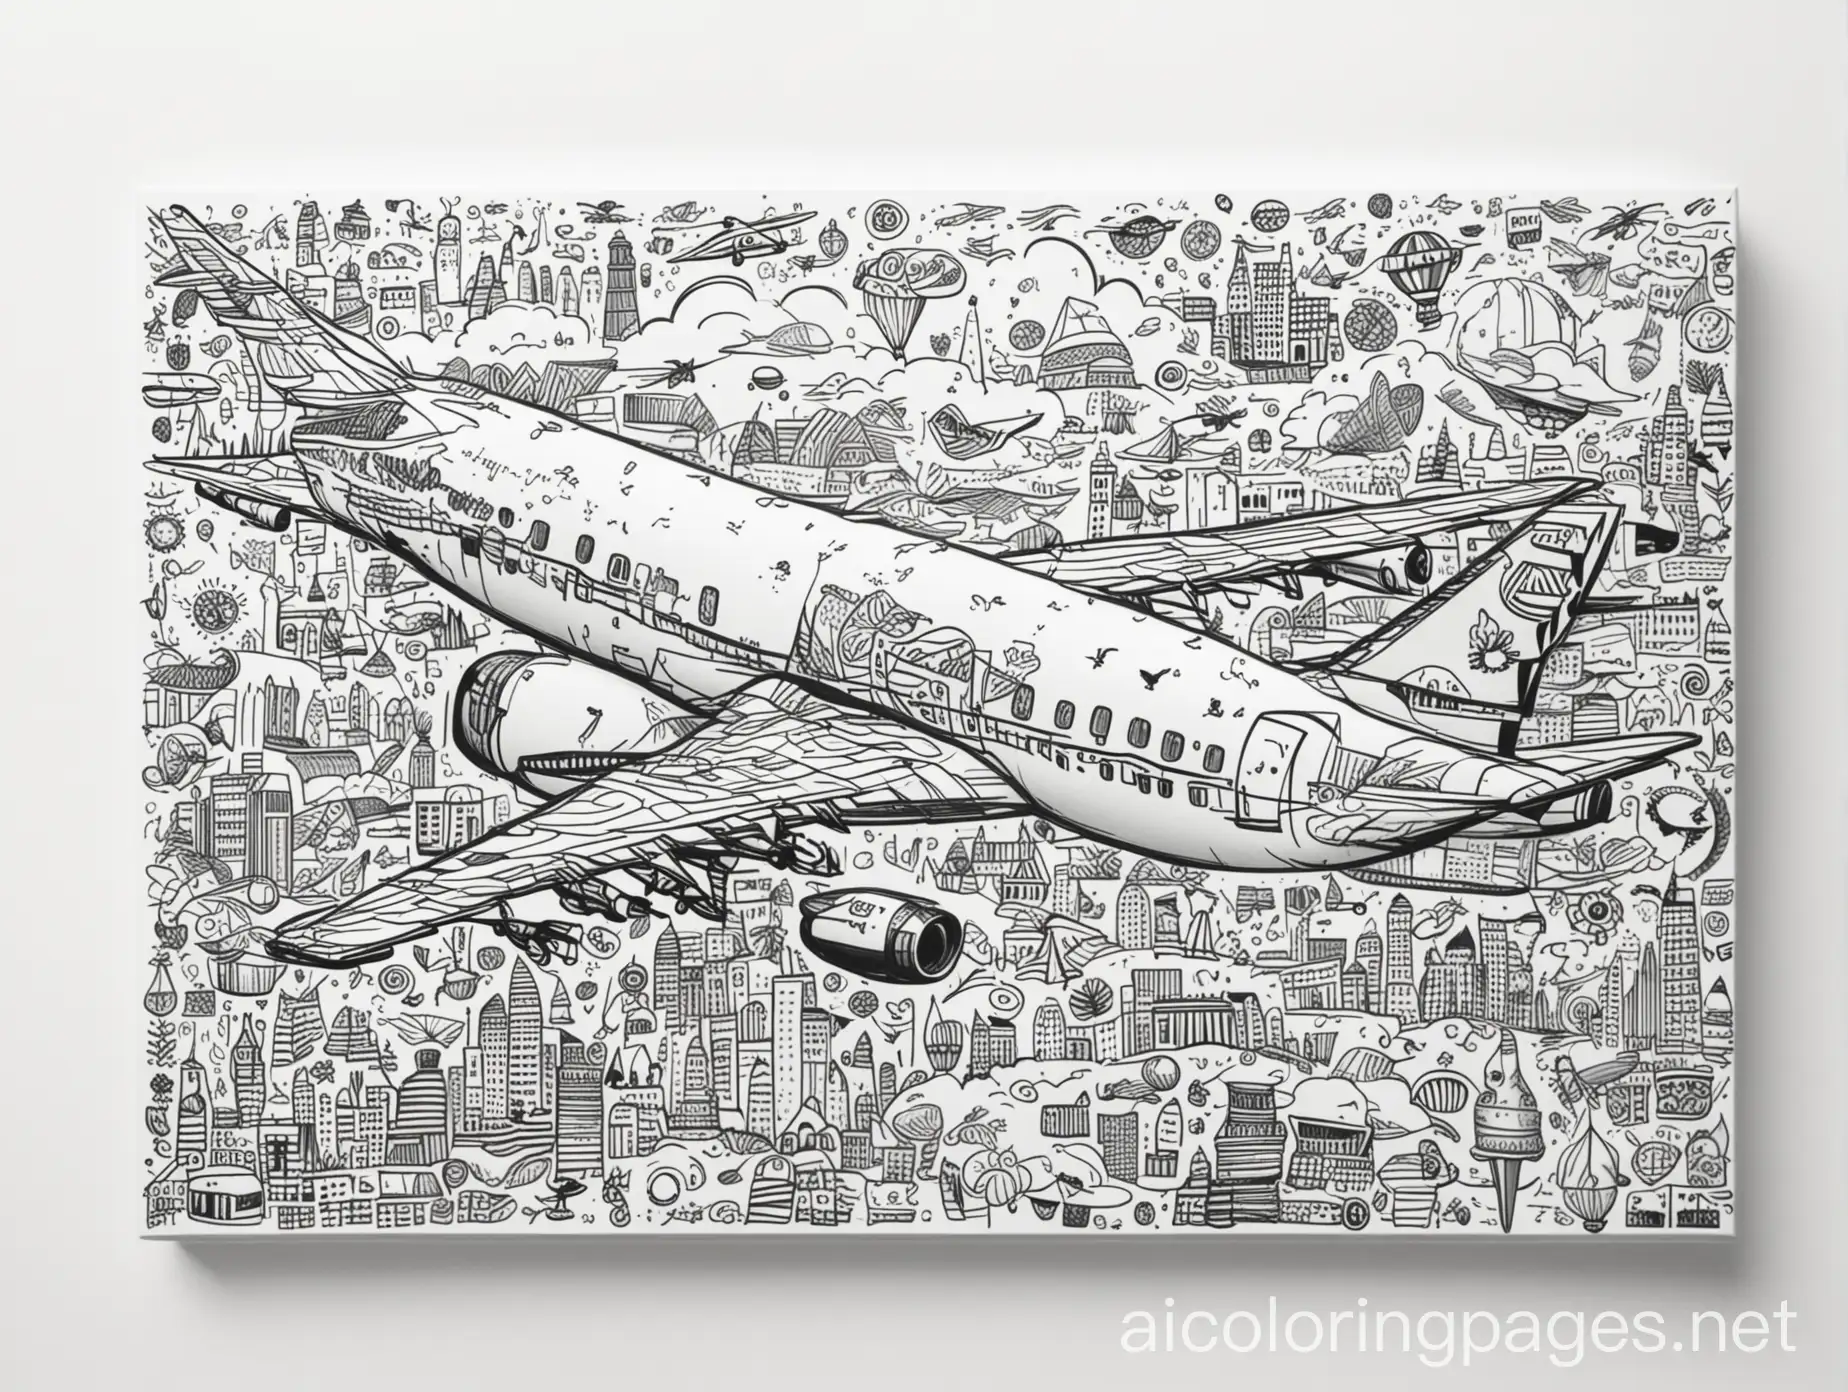 Fly abroad Doodle Collage, Coloring Page, black and white, line art, white background, Simplicity, Ample White Space. The background of the coloring page is plain white to make it easy for young children to color within the lines. The outlines of all the subjects are easy to distinguish, making it simple for kids to color without too much difficulty